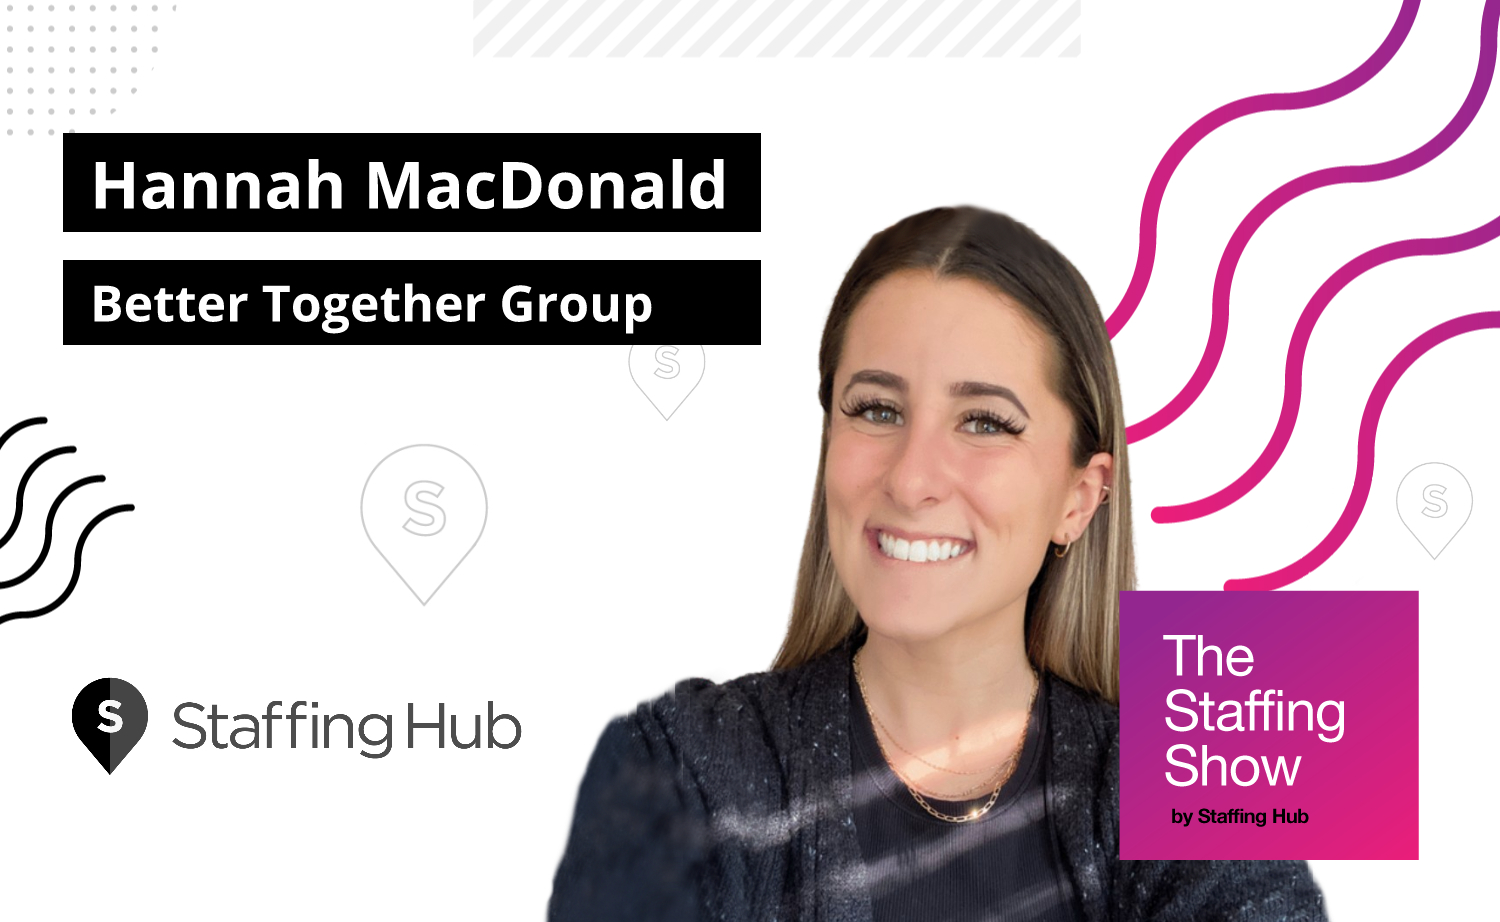 Hannah MacDonald, Co-Owner of Better Together, on Gen Z in the Workforce